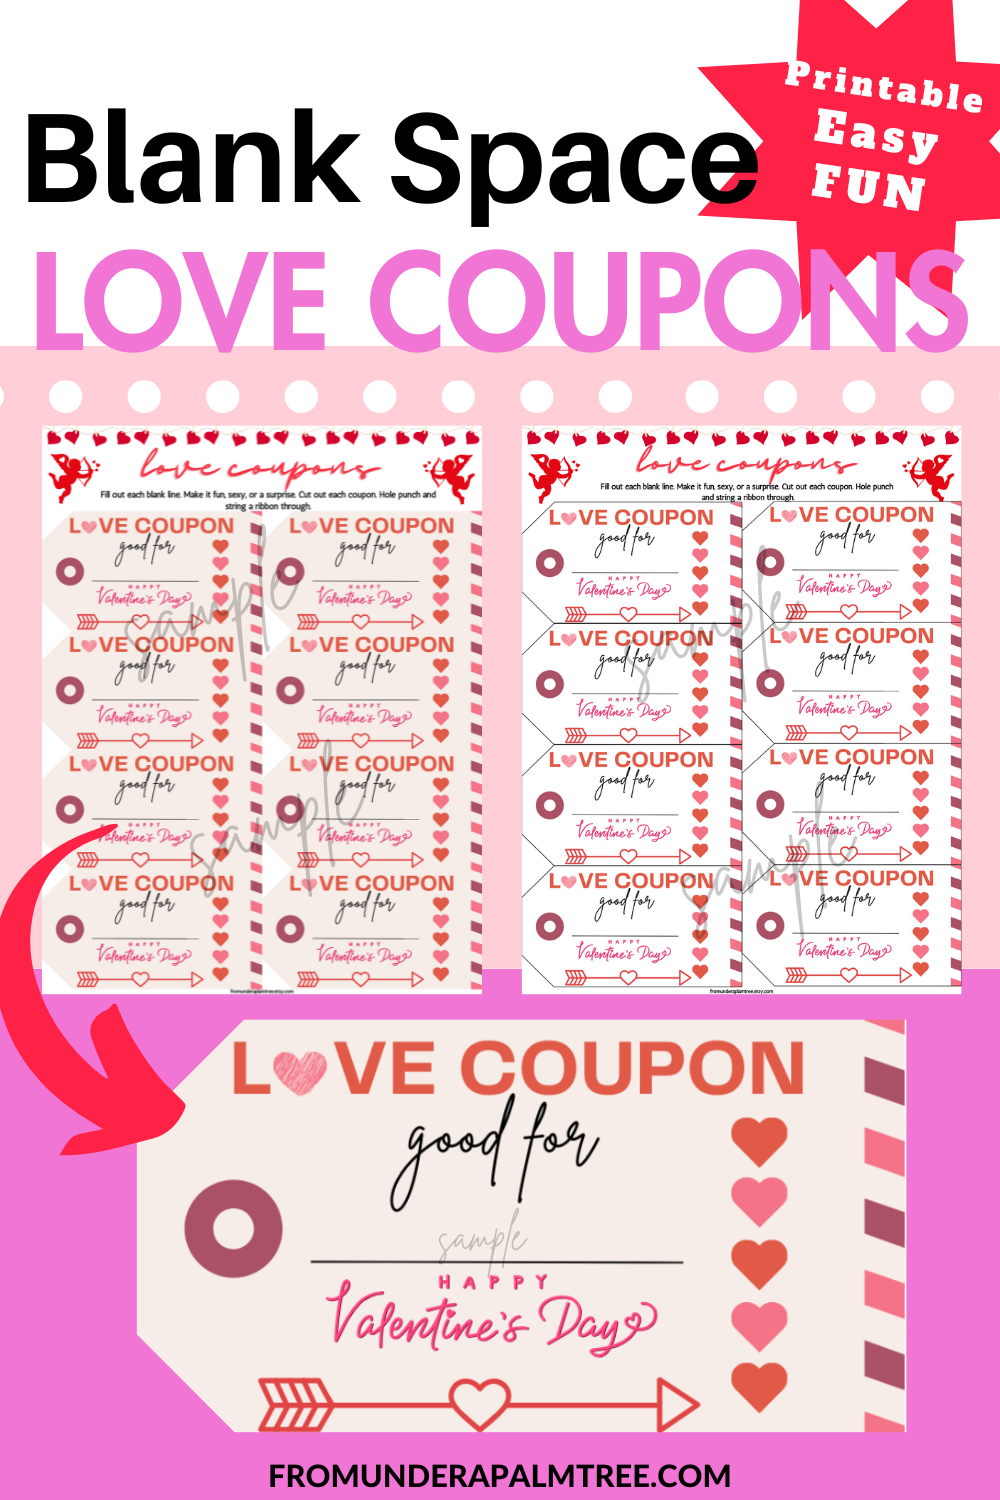 valentines day gifts for men | valentines day gifts for kids | love coupons for men | love coupons for kids | valentines day ideas | instant download | digital download | love coupons pdf | love coupons for women | inexpensive valentines dat gifts | budget friendly valentines day gift | low budget valentines day gifts | valentines day gift ideas | blank love coupons |